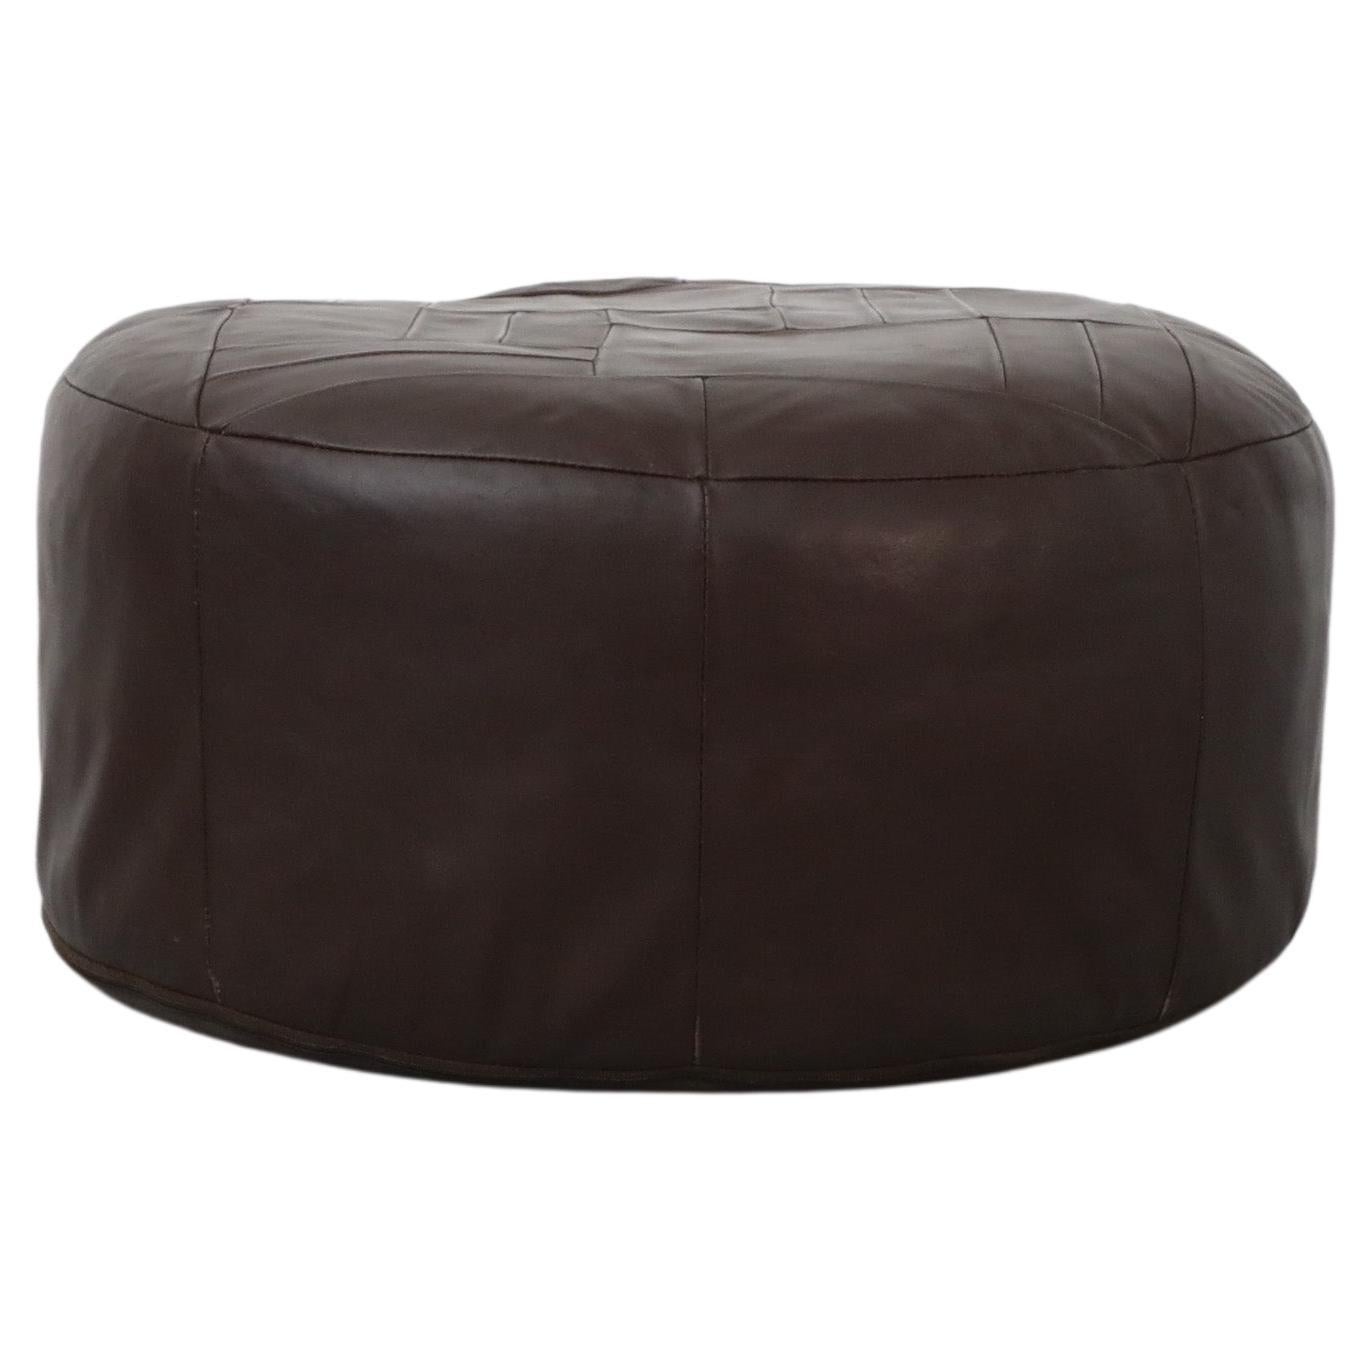 Mid-Century De Sede Inspired Round Chocolate Brown Patchwork Leather Ottoman